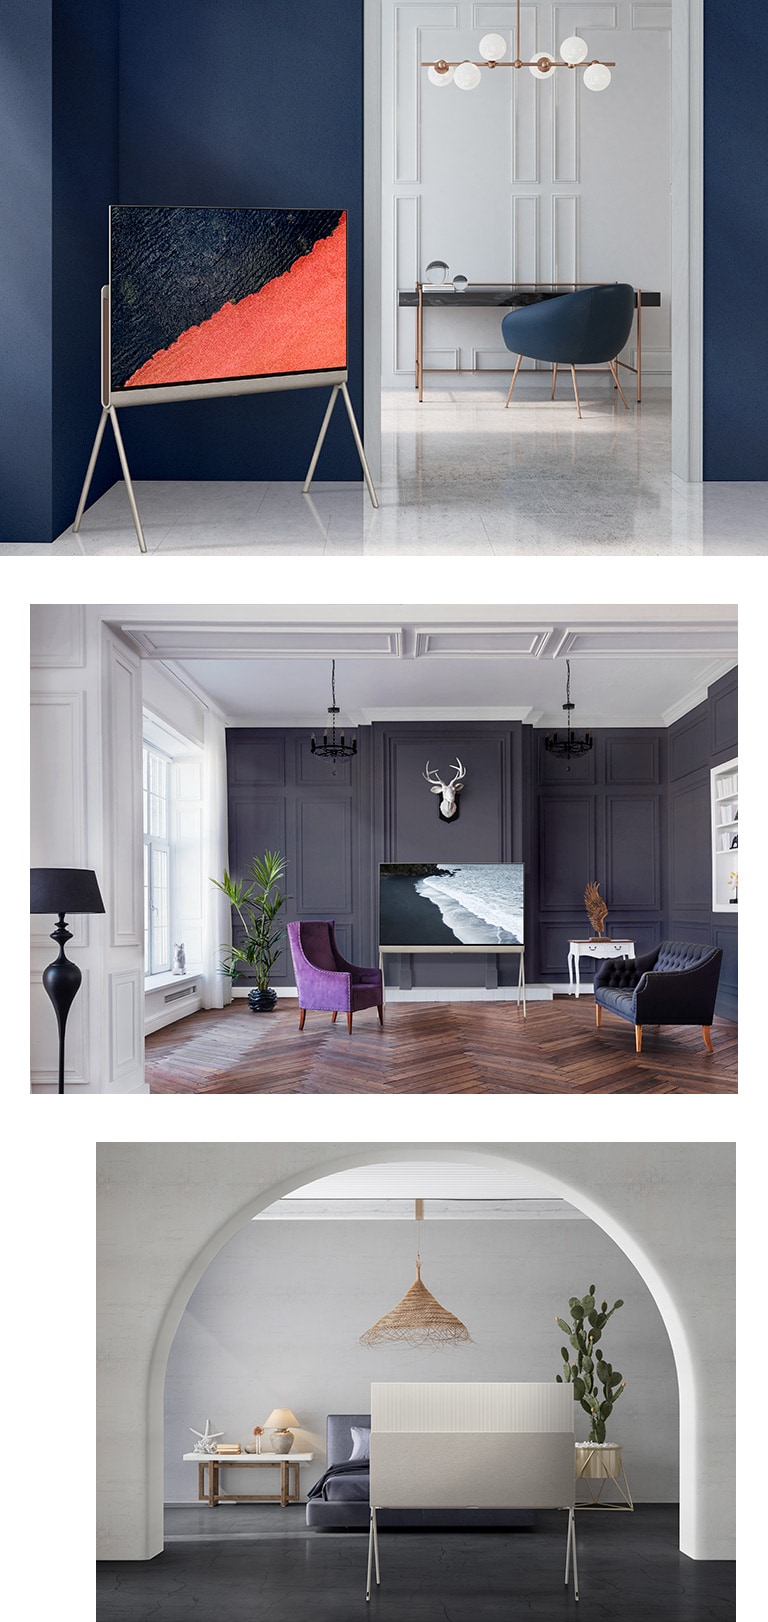 Posé in three interior spaces. The first is seen in the corner of a navy painted wall with a black and red artwork on-screen, while a desk and navy armchair are in the room behind it. The second is seen in the center of a modern, charcoal painted wall underneath a deer mount with an image of waves on-screen. The third is seen from behind in the center of the room and used as an artful statement piece in front of the bed.